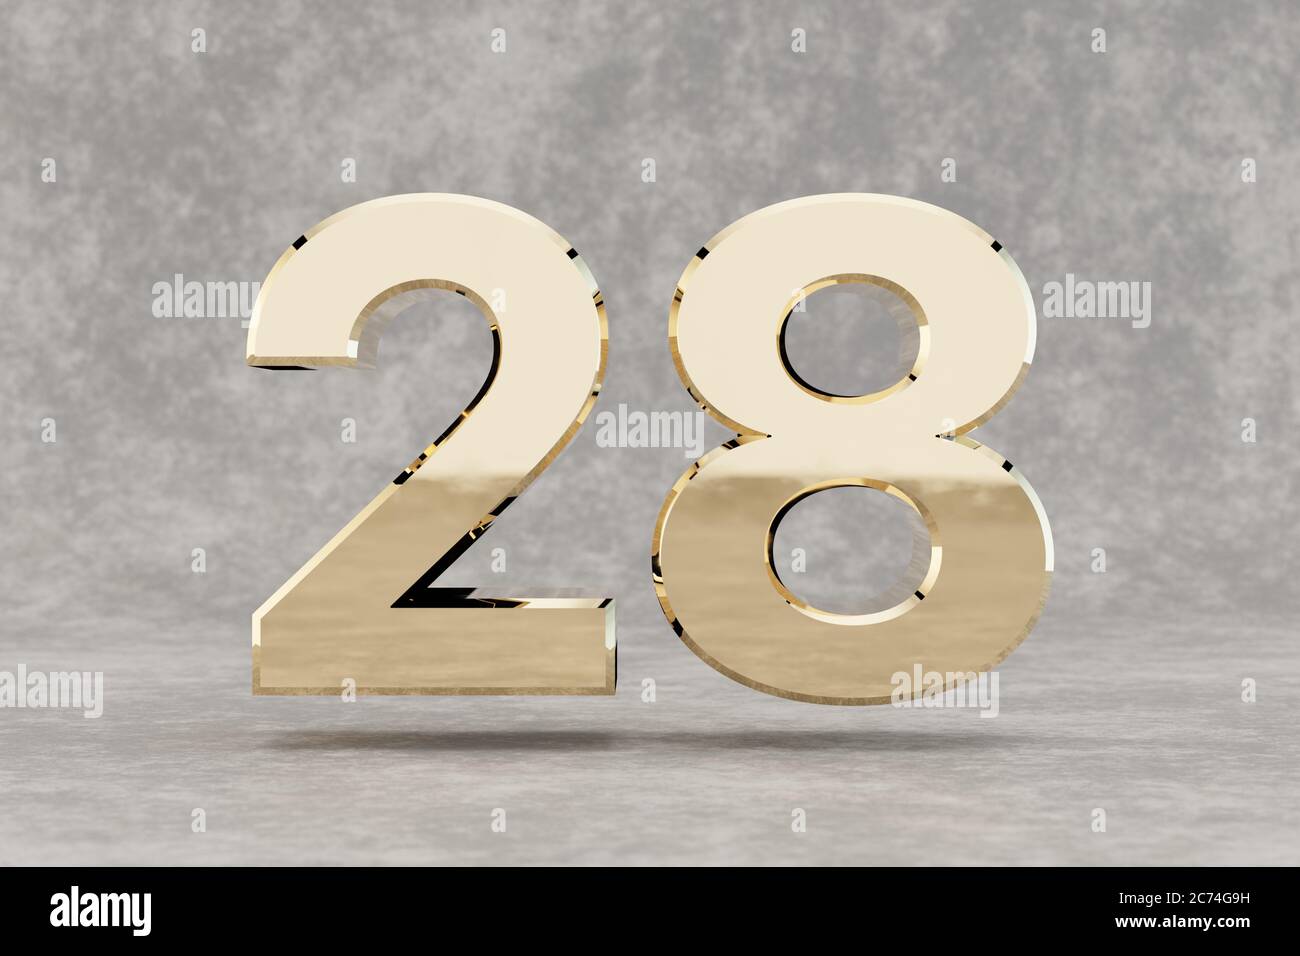 Gold 3d number 28. Glossy golden number on concrete background. Metallic digit with studio light reflections. 3d render. Stock Photo